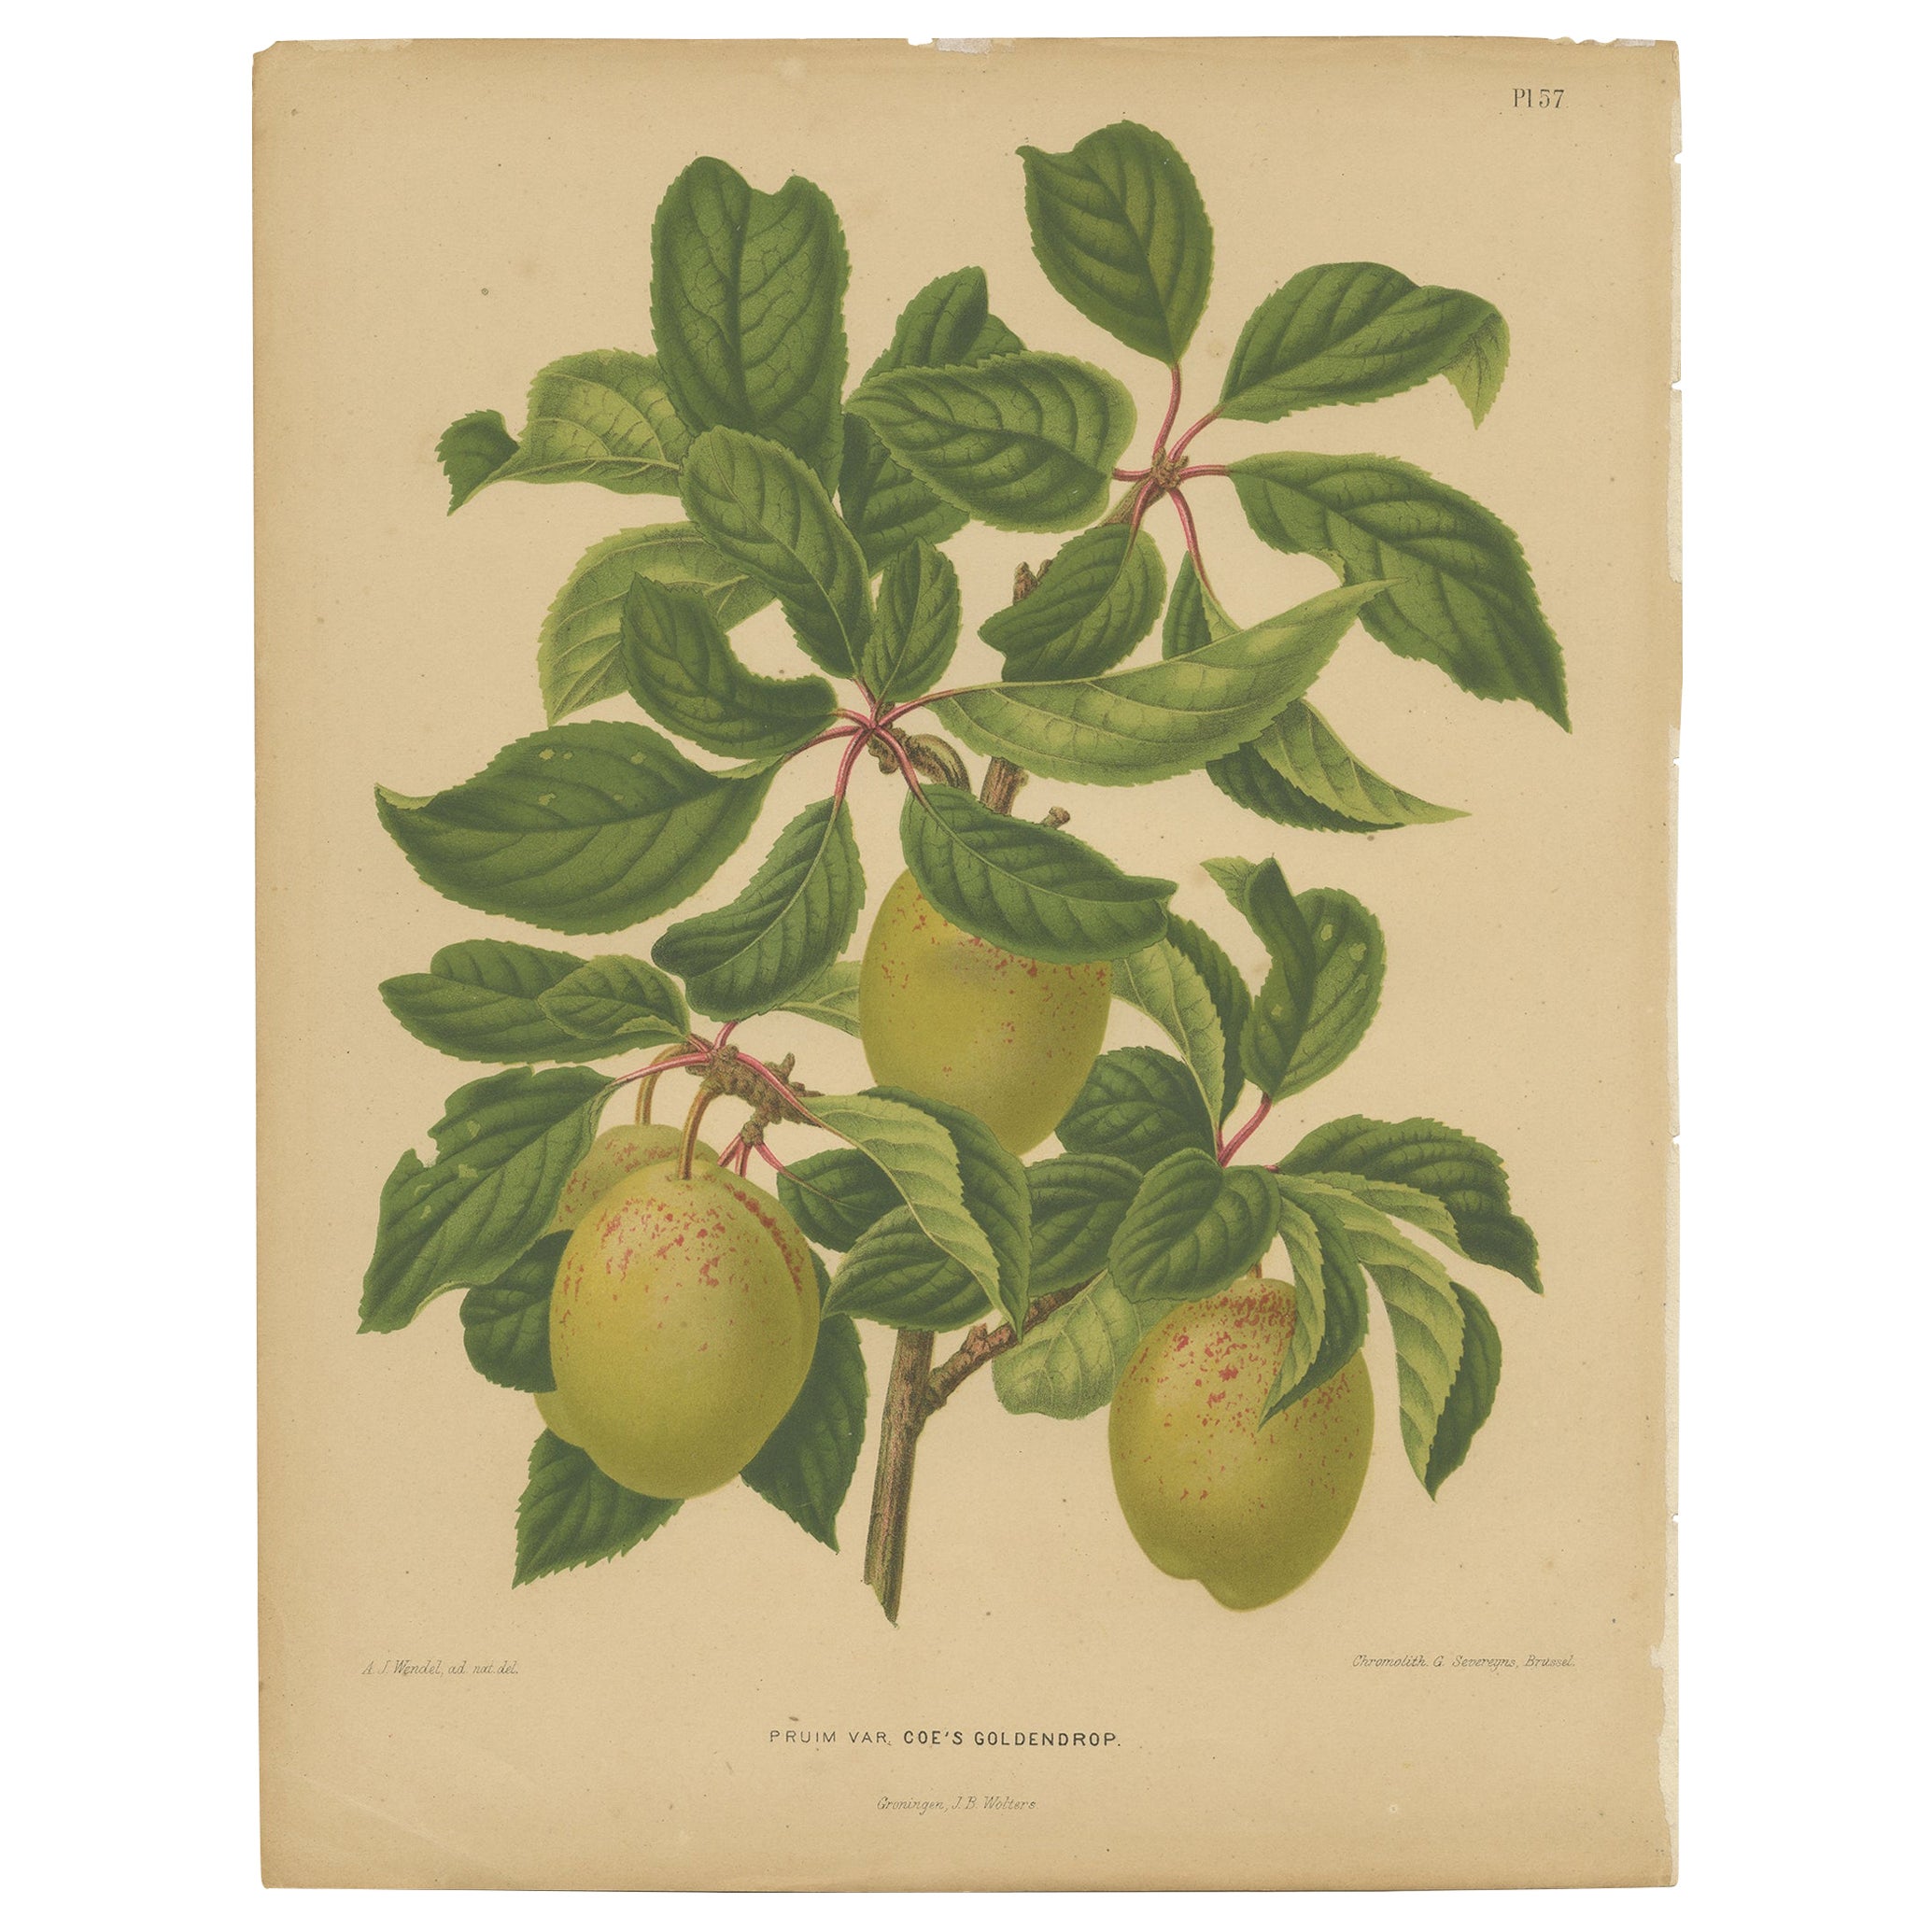 Antique Hand-Colored Flower Print of the Coe's Golden Drup Plum, 1879